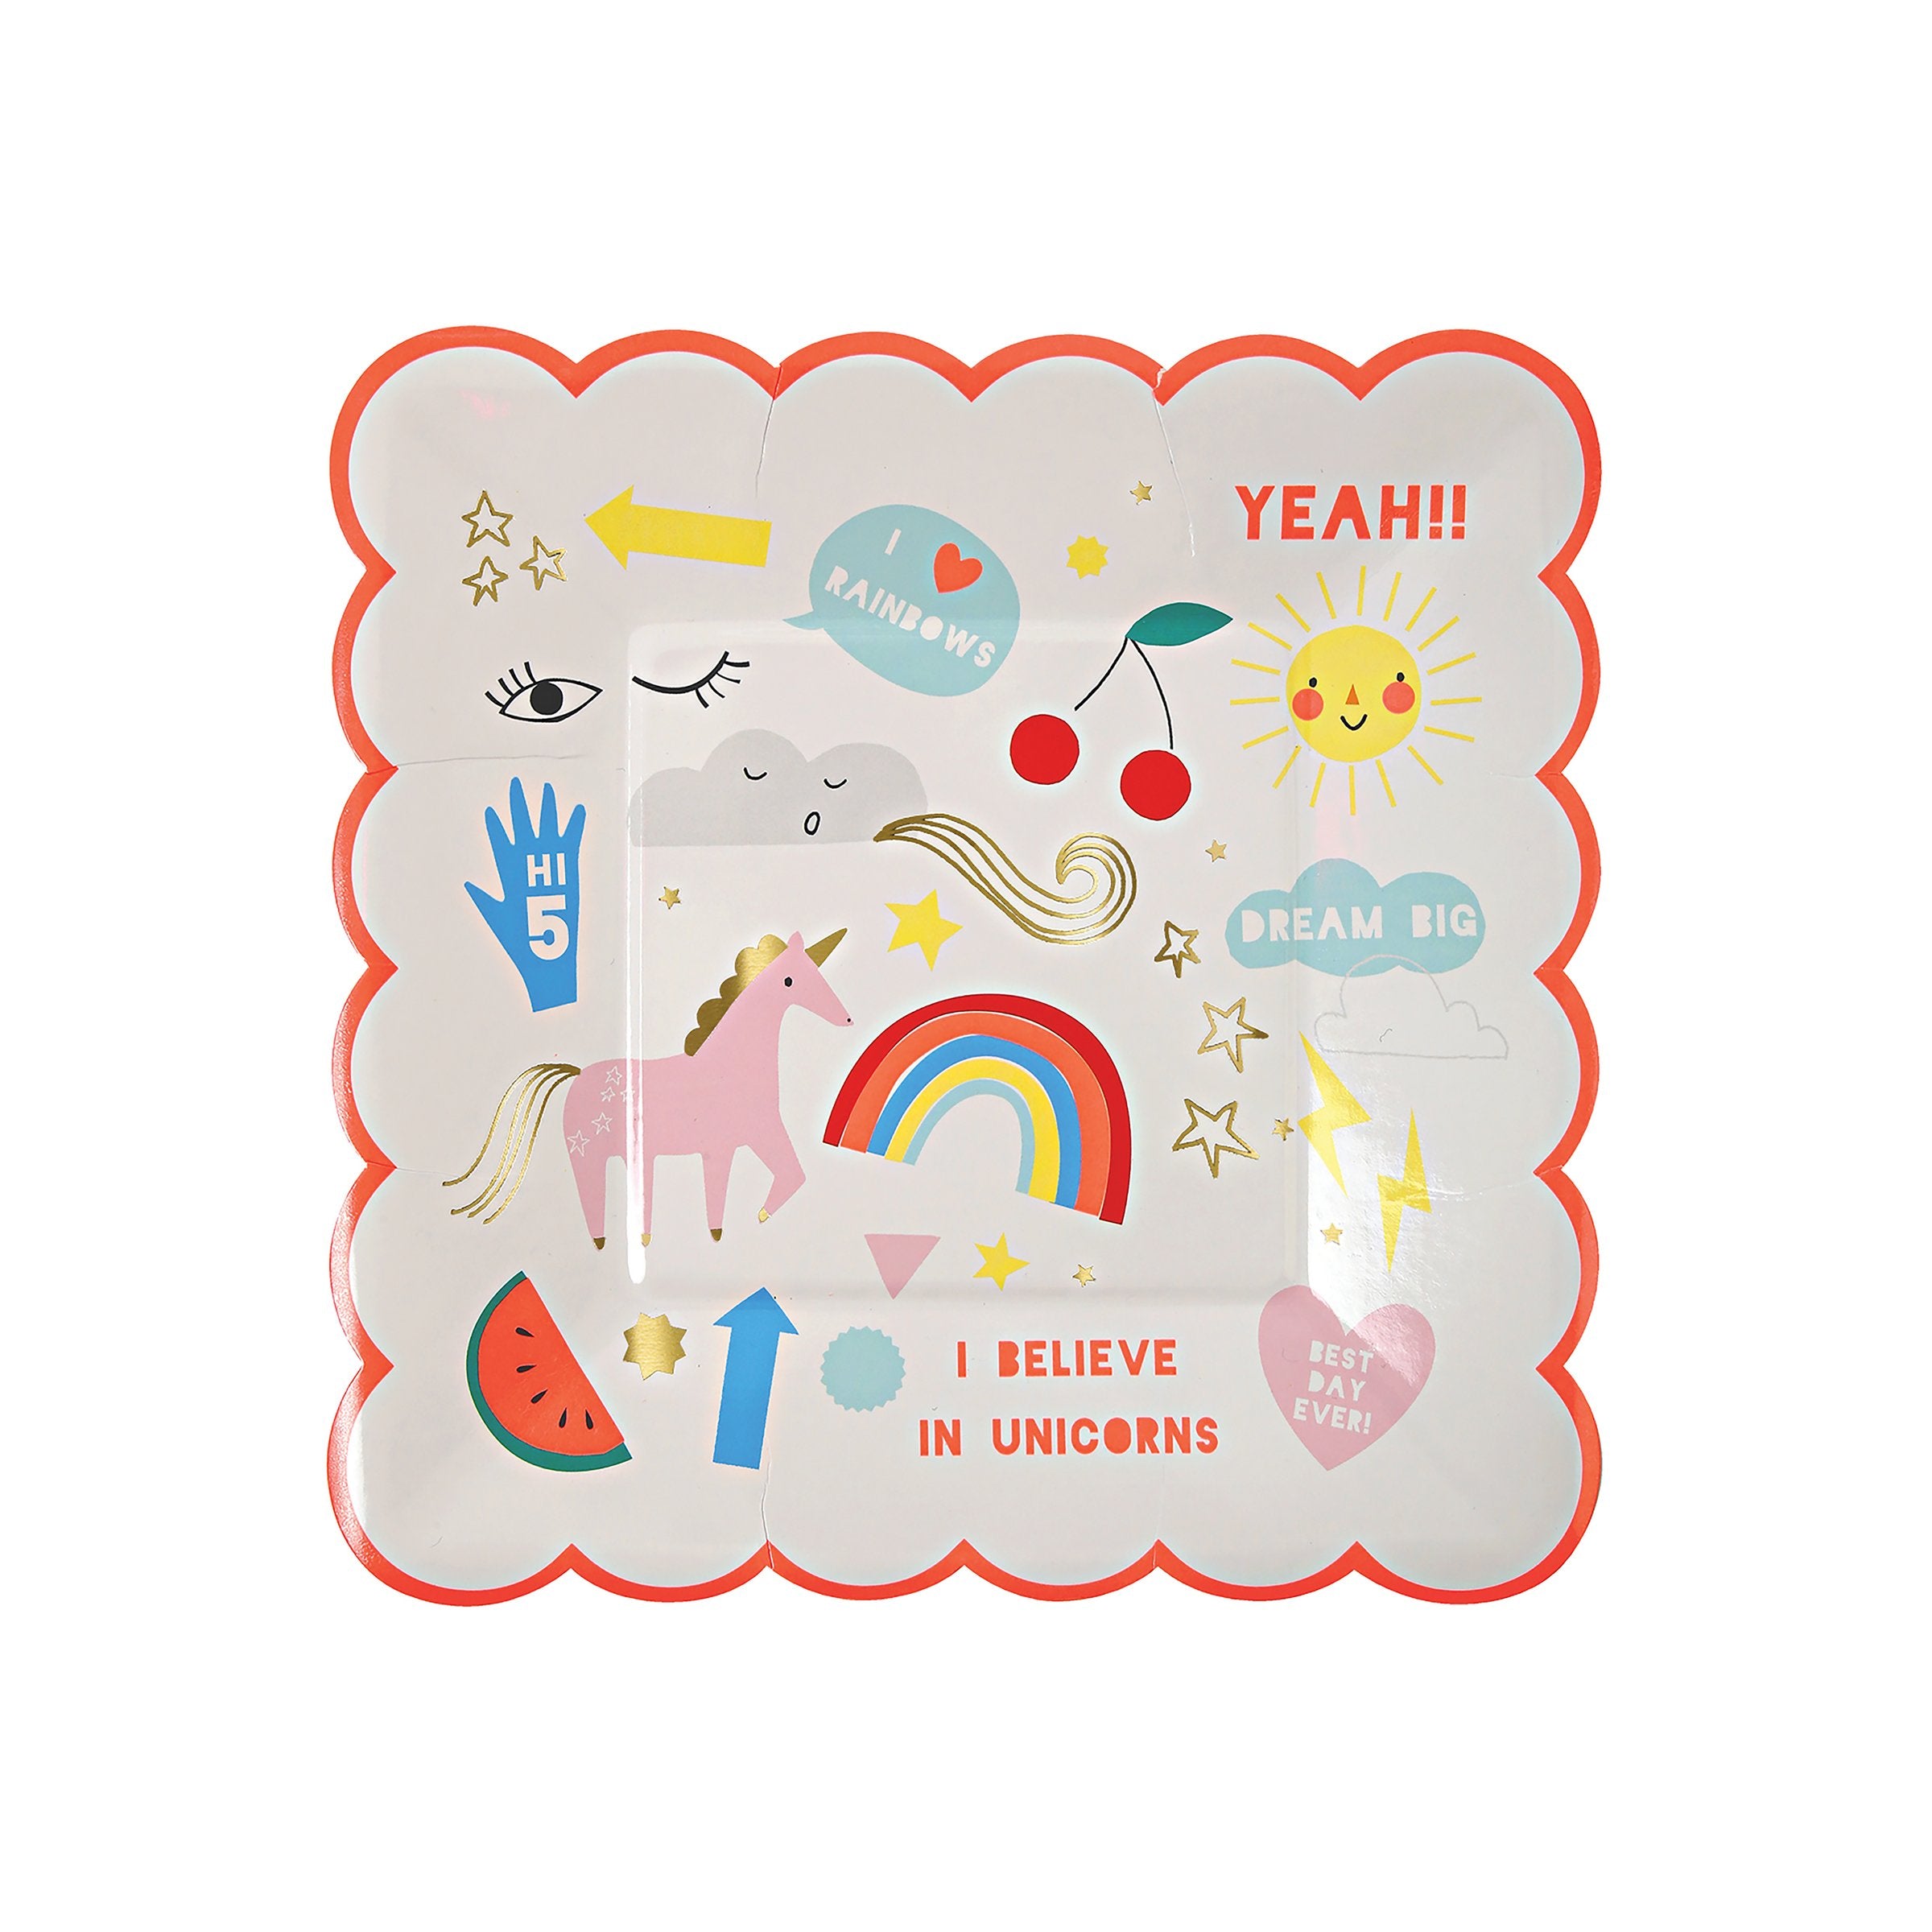 These delightful plates, with neon print and gold foil detail, are perfect for a unicorn birthday party.